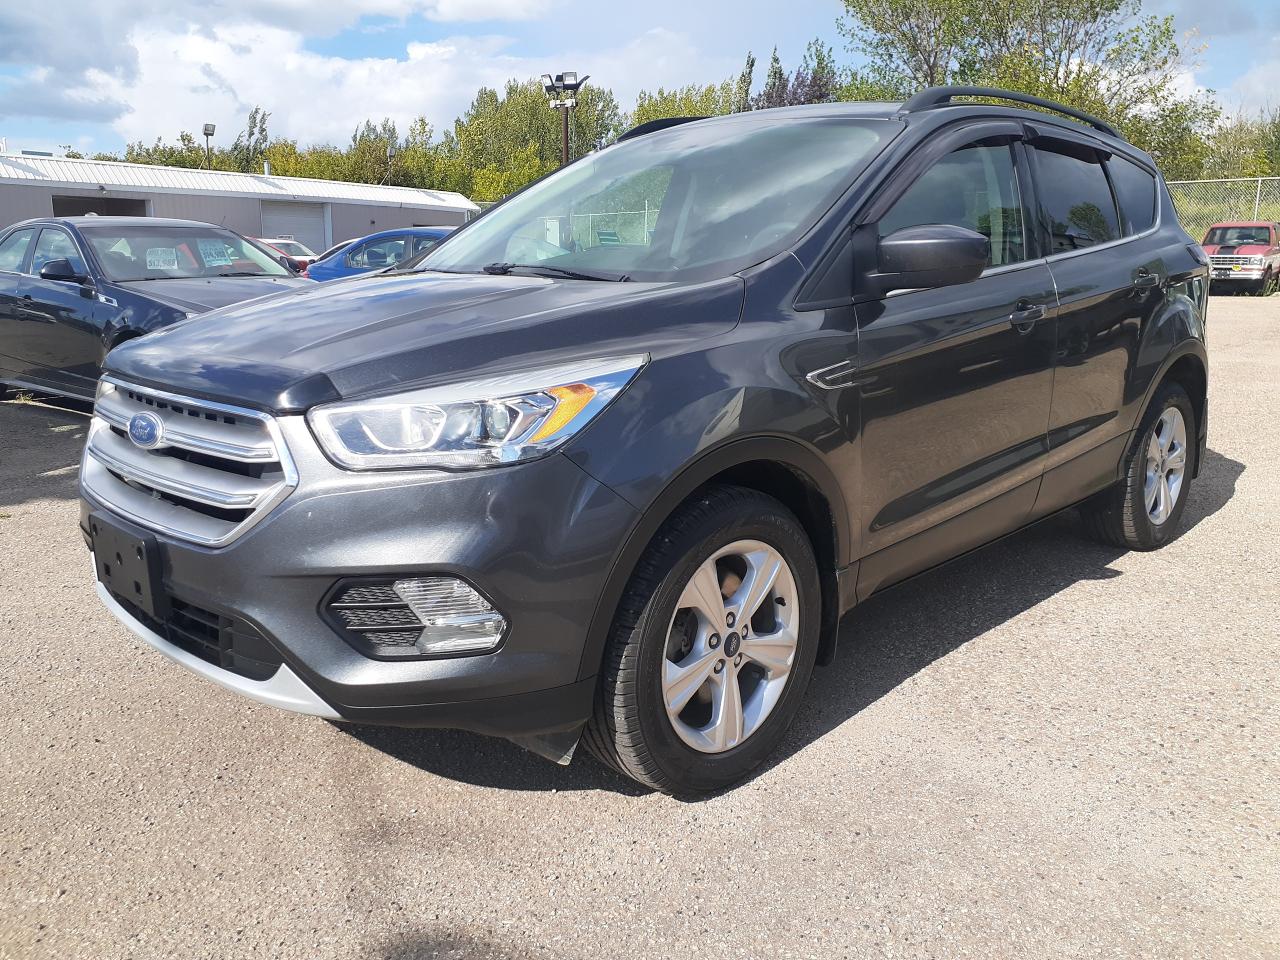 2017 Ford Escape SE AWD Large BU Cam, Htd Seats, Power Seat - Photo #3